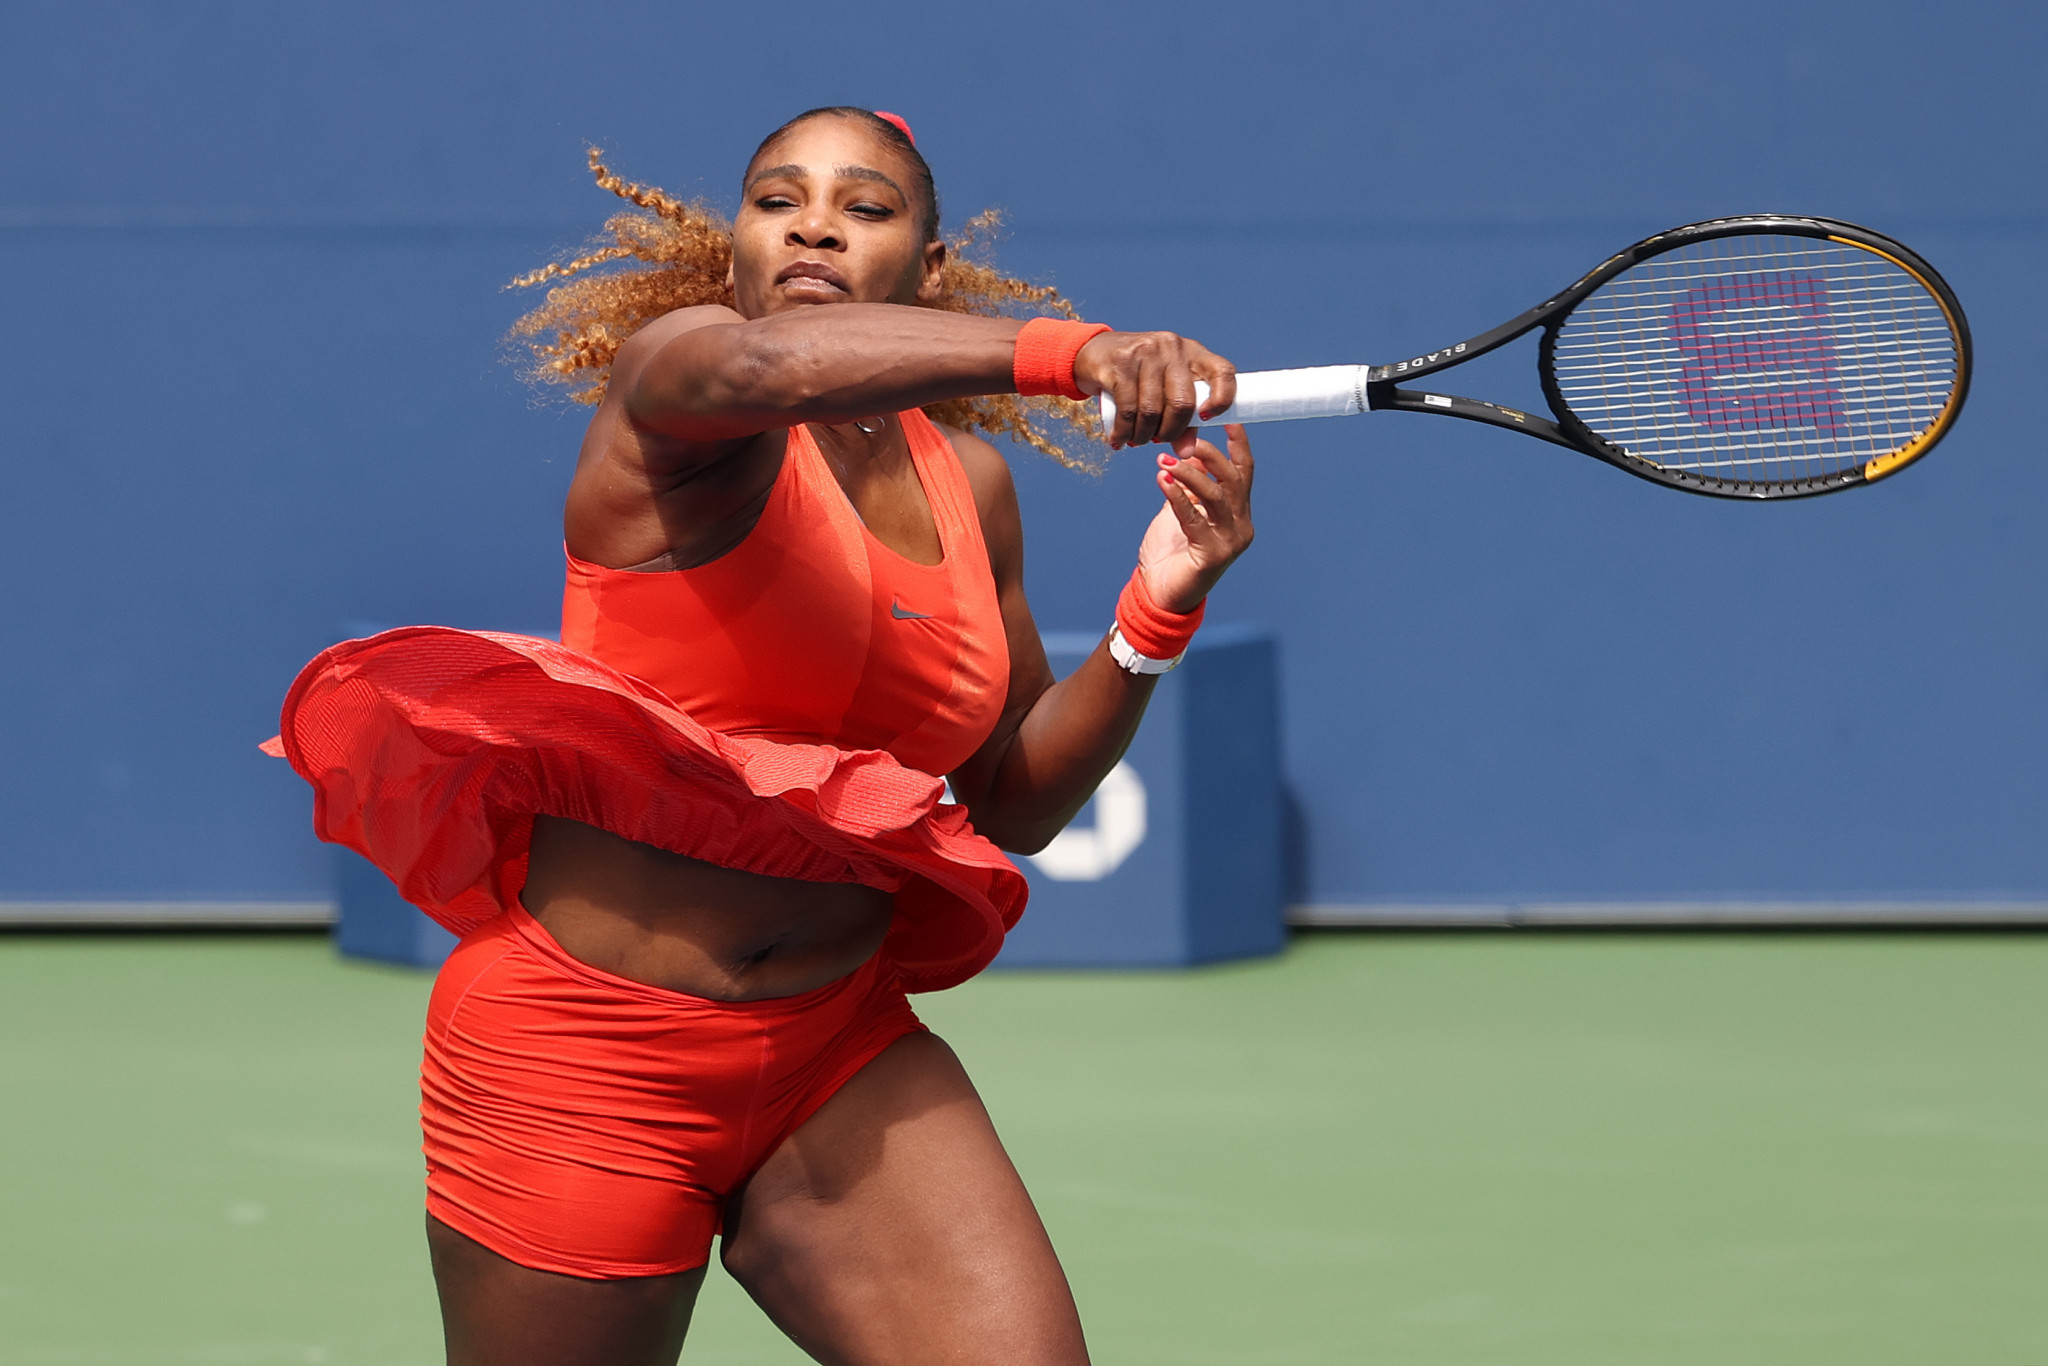 Serena Williams recovered from a set down against Tsvetana Pironkova to reach the last four ©Getty Images